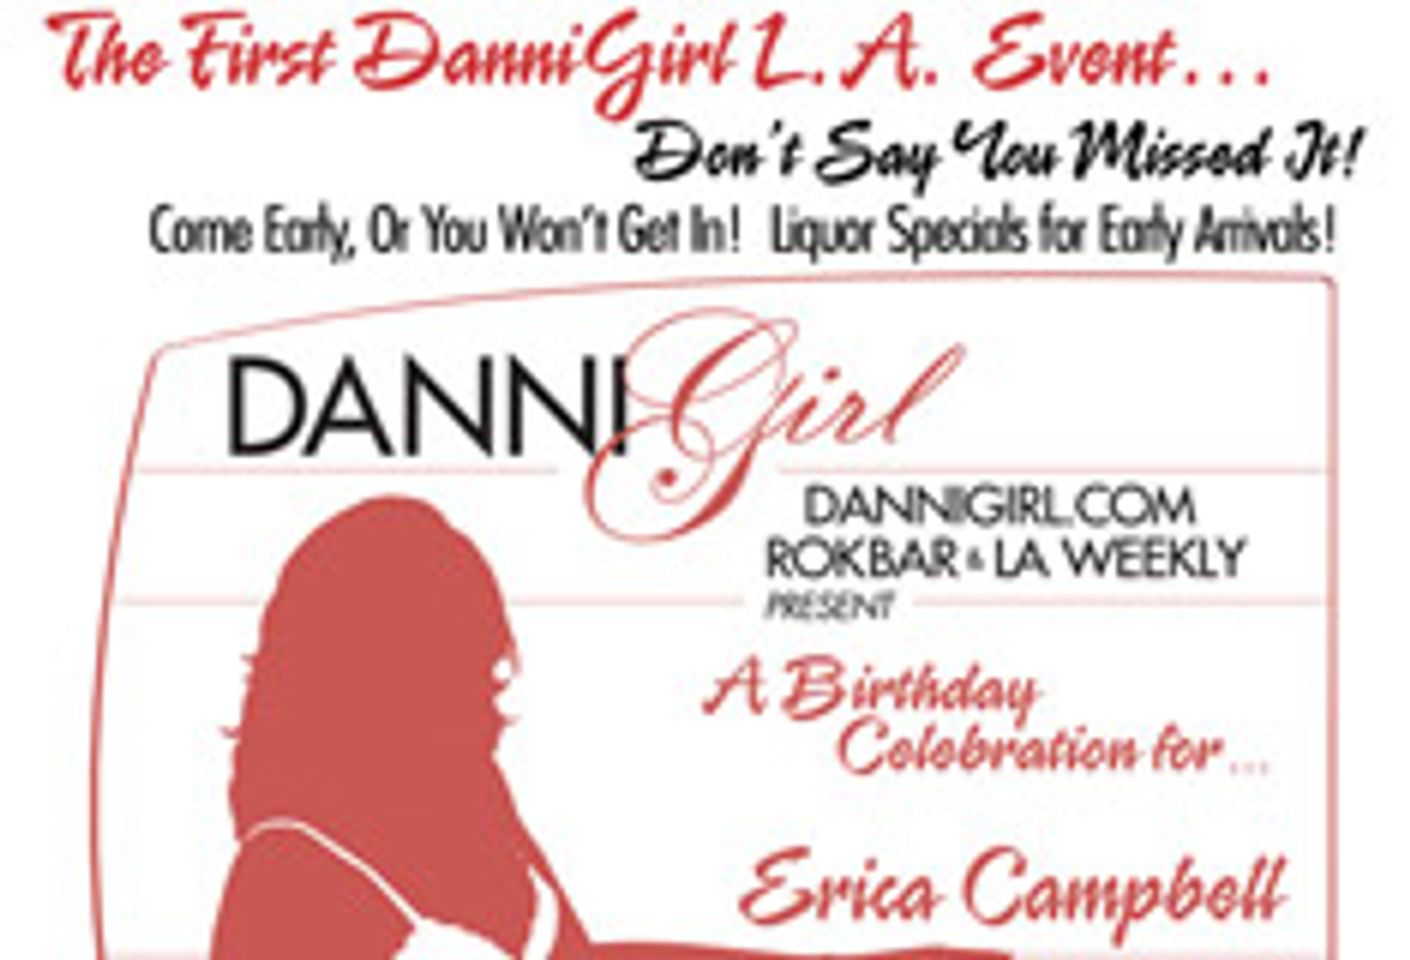 Danni.com to Host Party for Erica Campbell